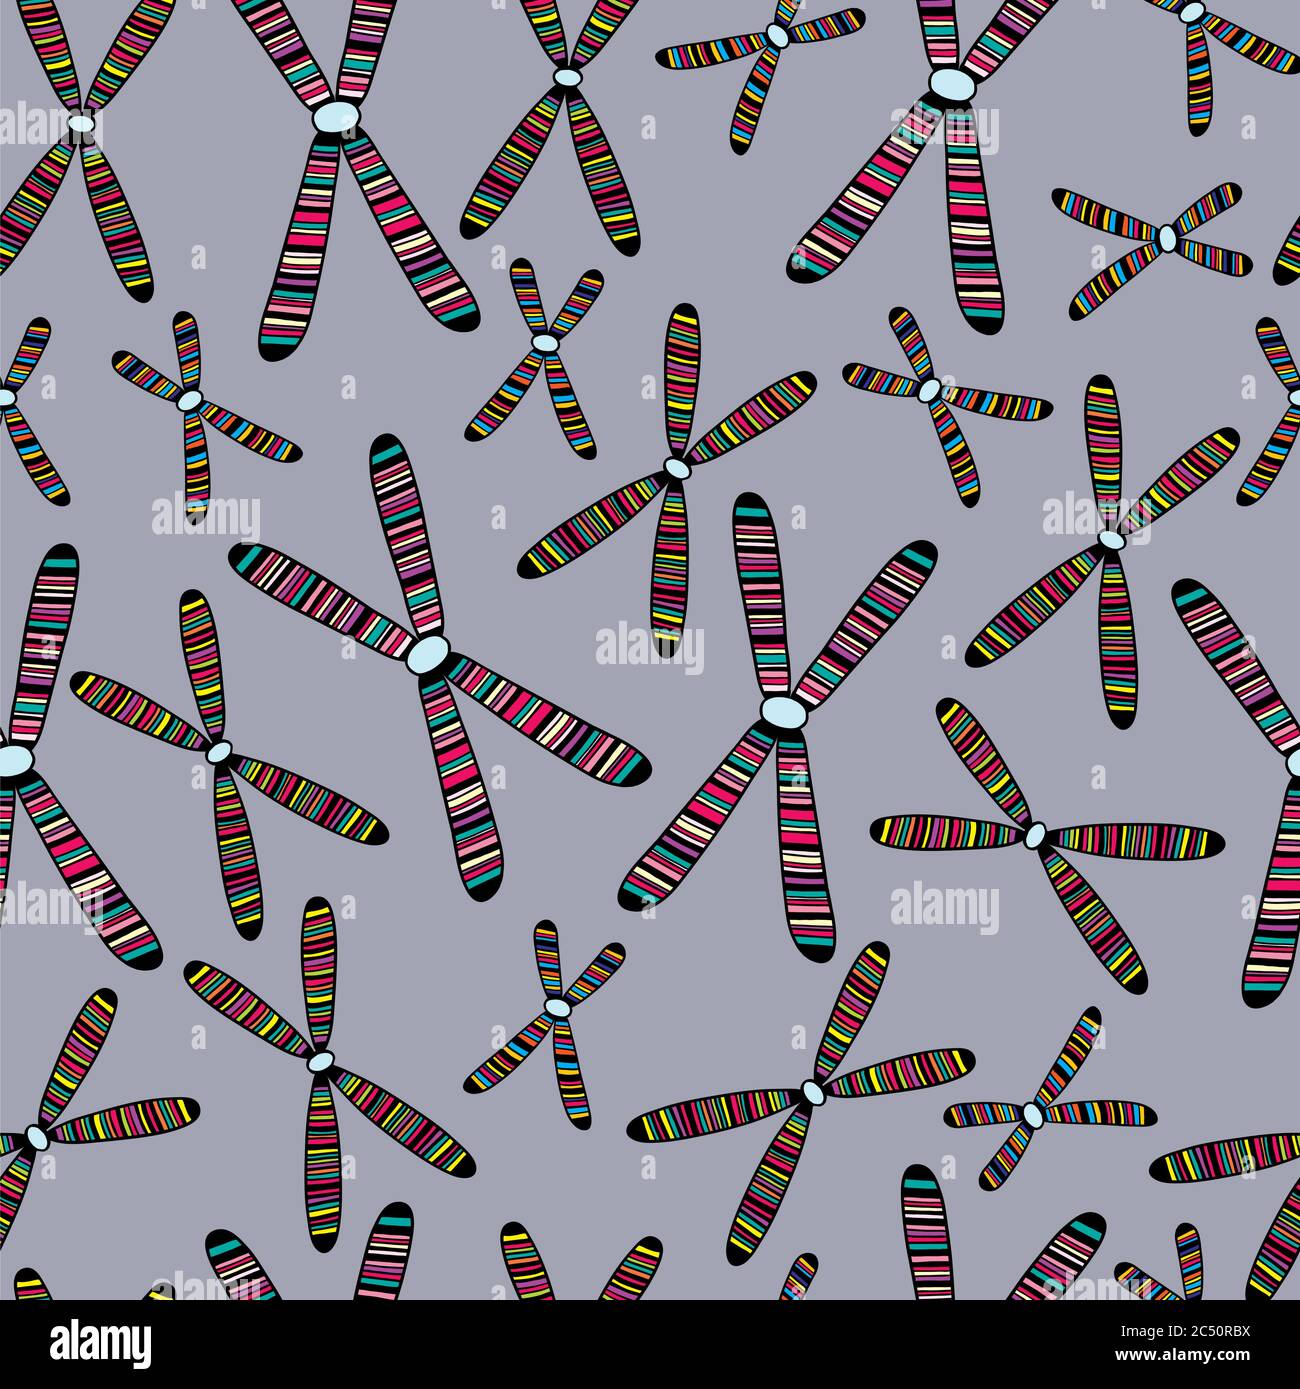 Seamless pattern with colorful chromosomes. Vector illustration. Stock Vector